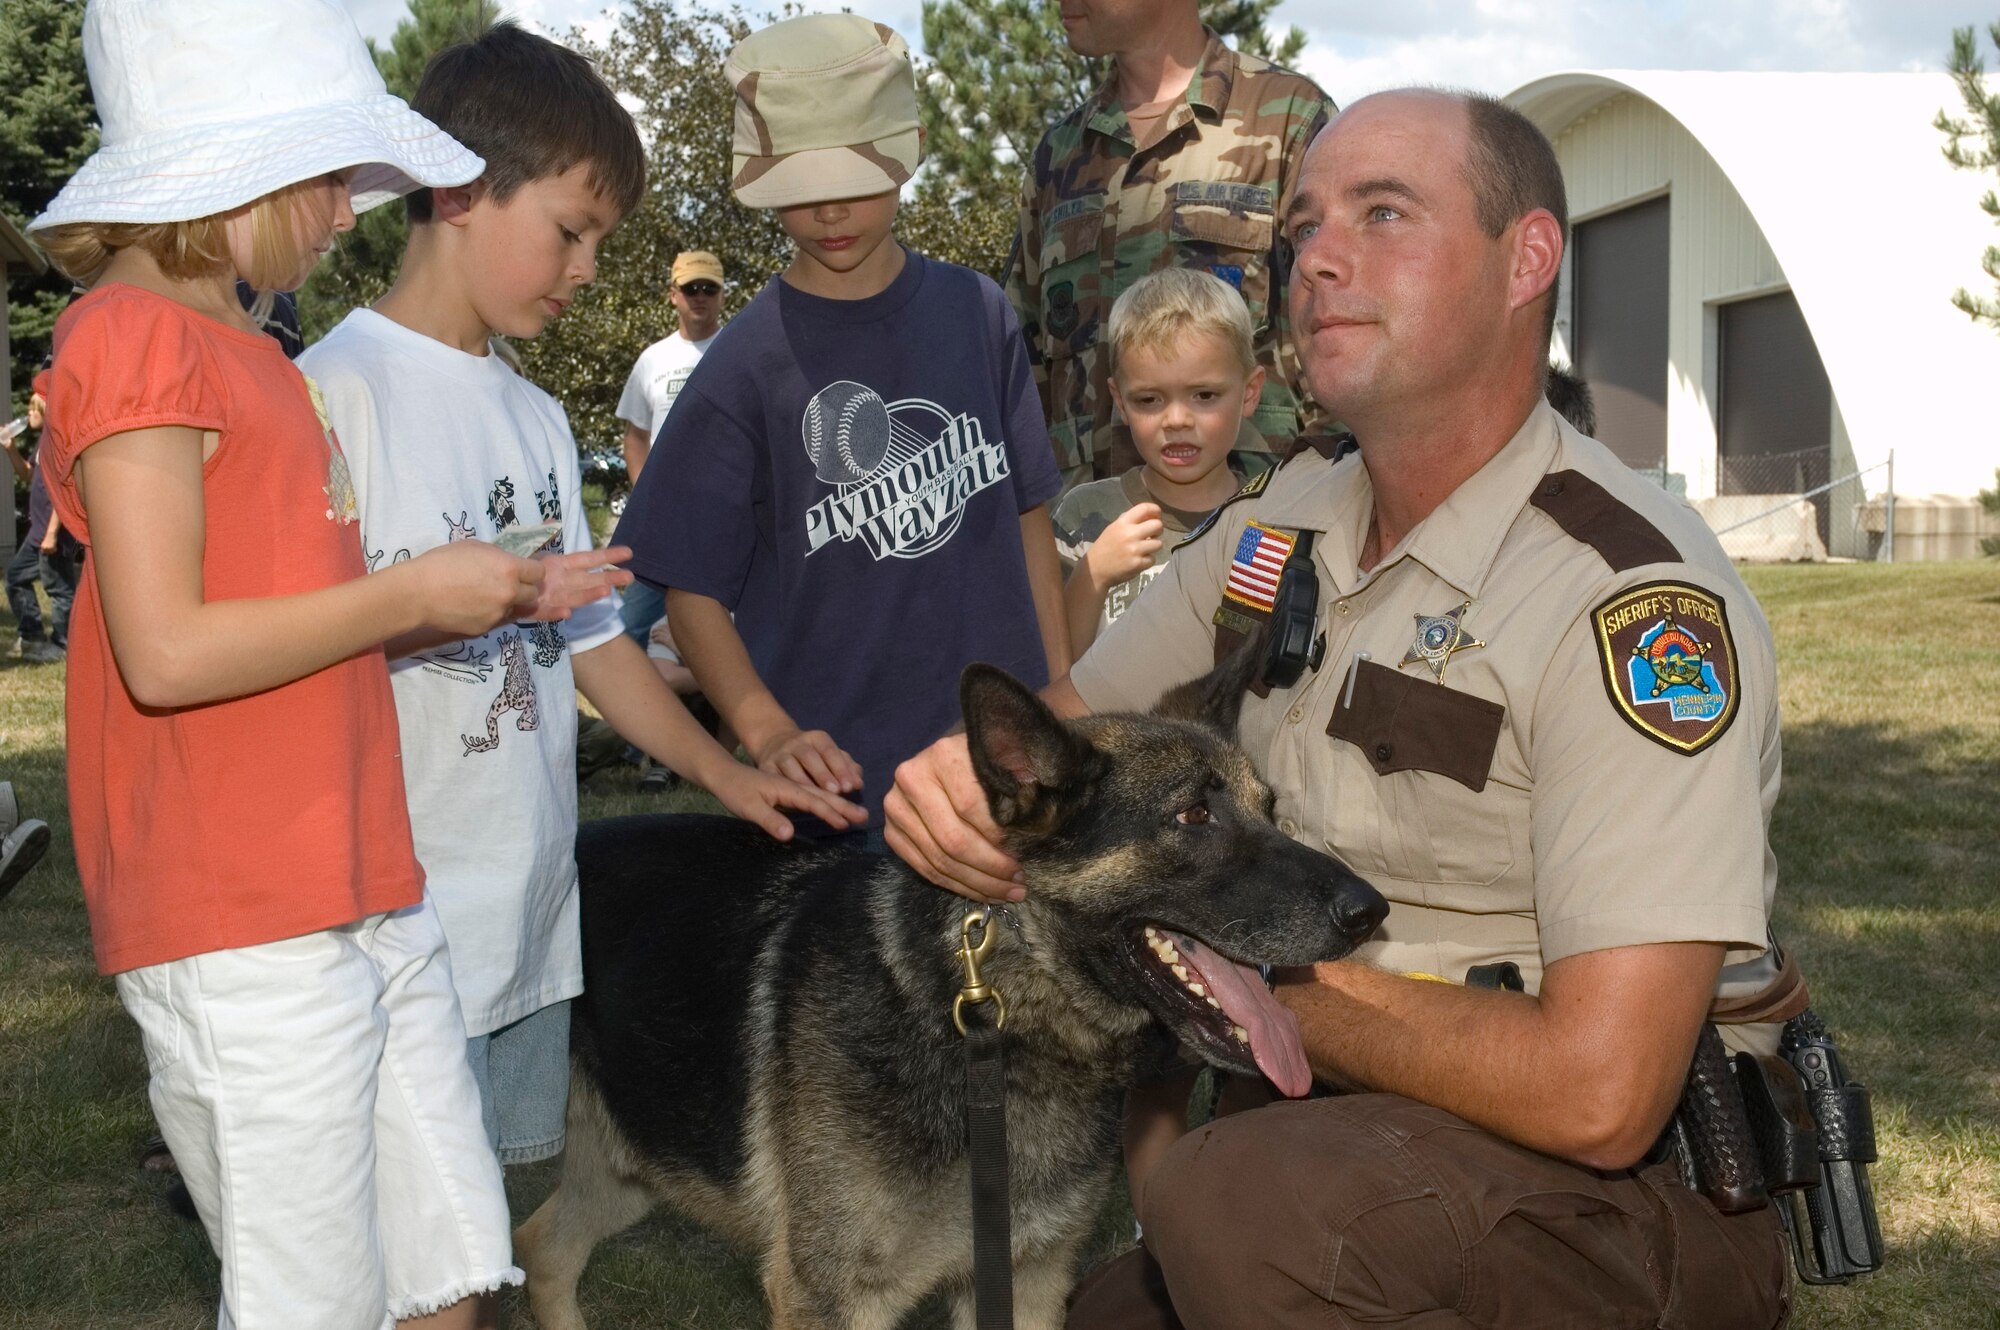 The 133rd Airlift Wing, St. Paul, Minn., held its annual Family Day on Aug. 16, 2008. Activities included a rock climbing wall, a K-9 demonstration from the Hennepin County Sherriff's office, games and pony rides.